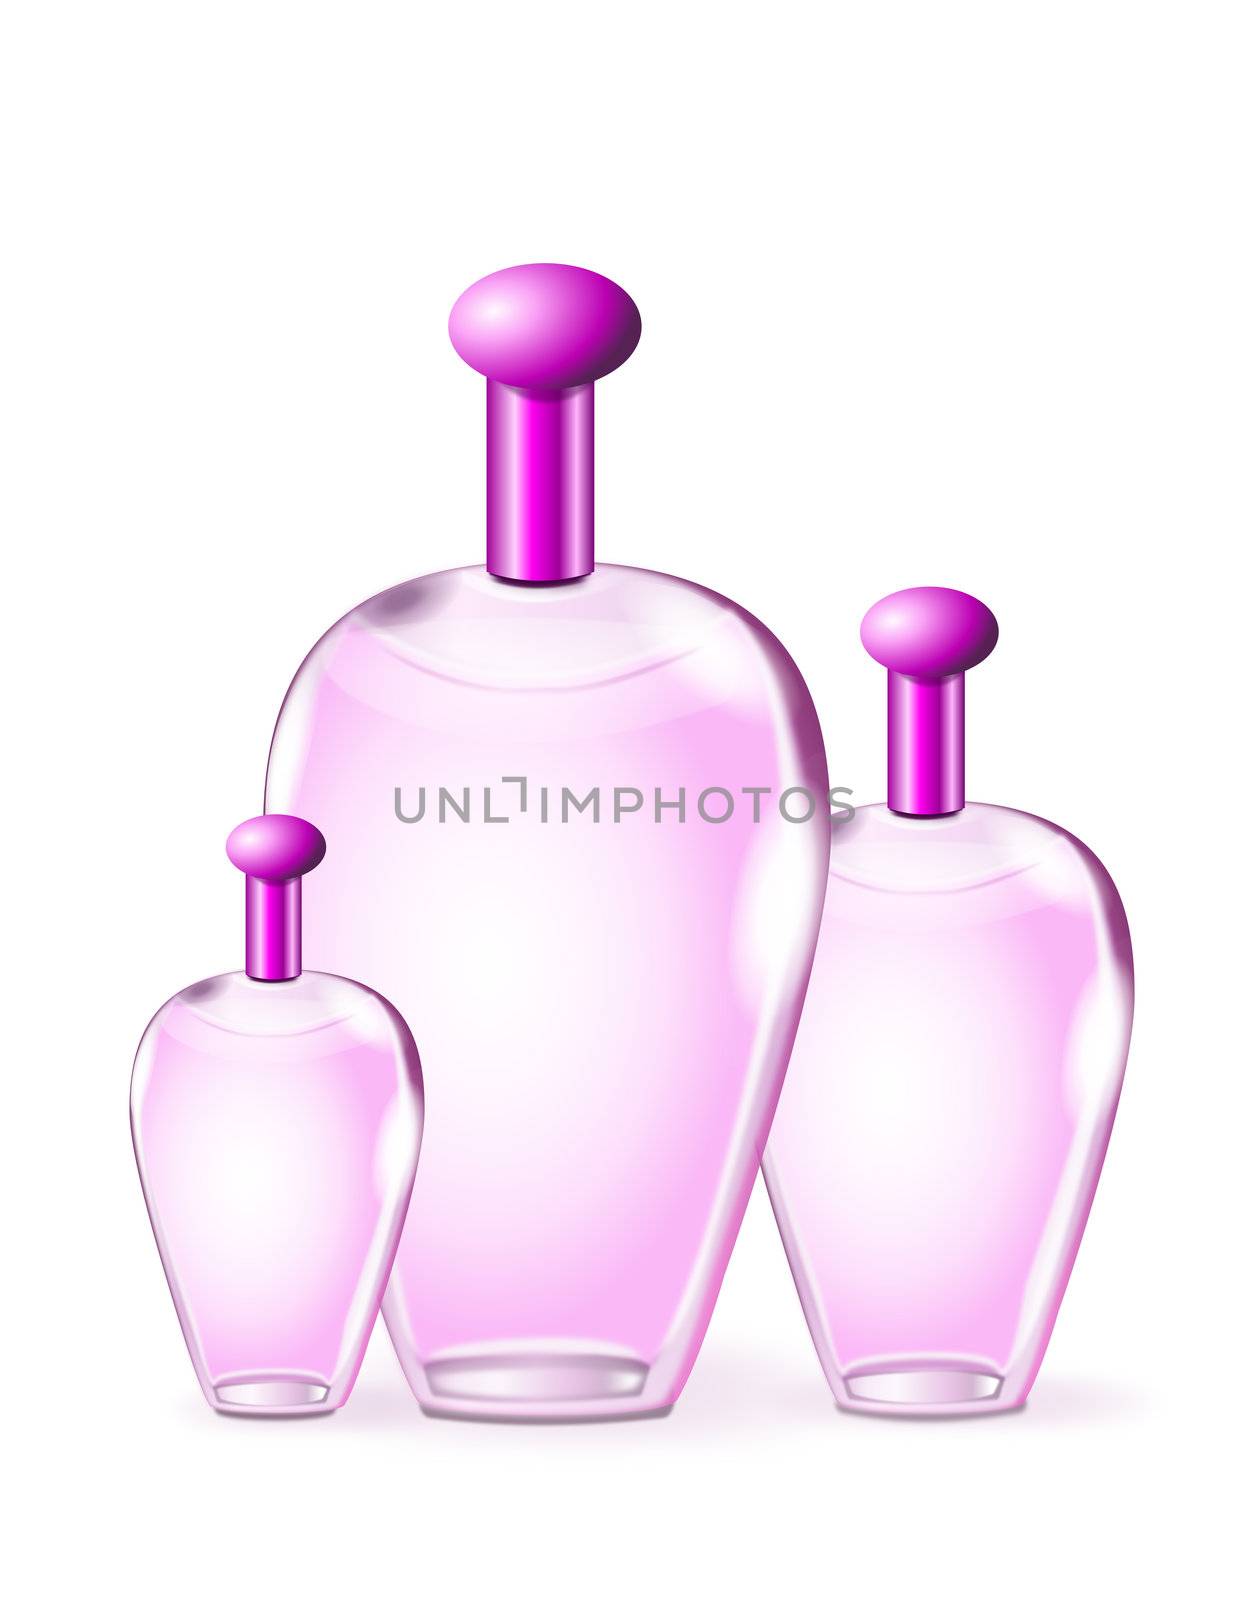 Illustrated pink perfume bottles arranged with white background.